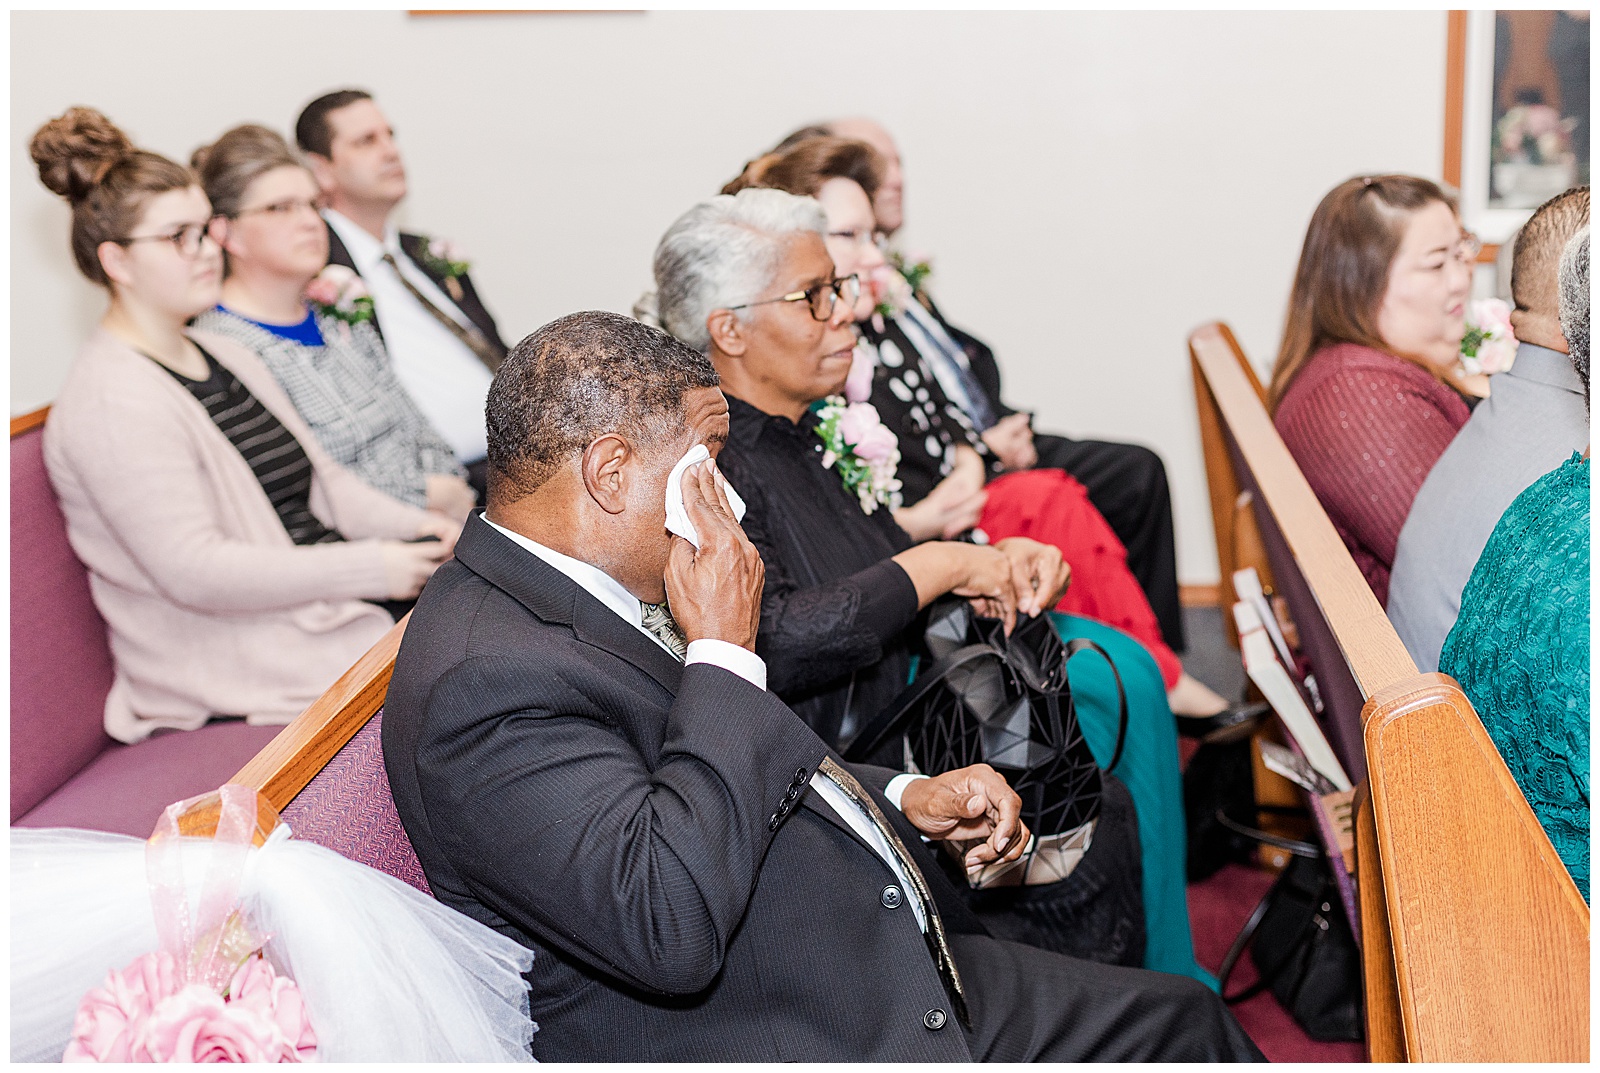 Guests emotional during Seattle Apostolic wedding ceremony